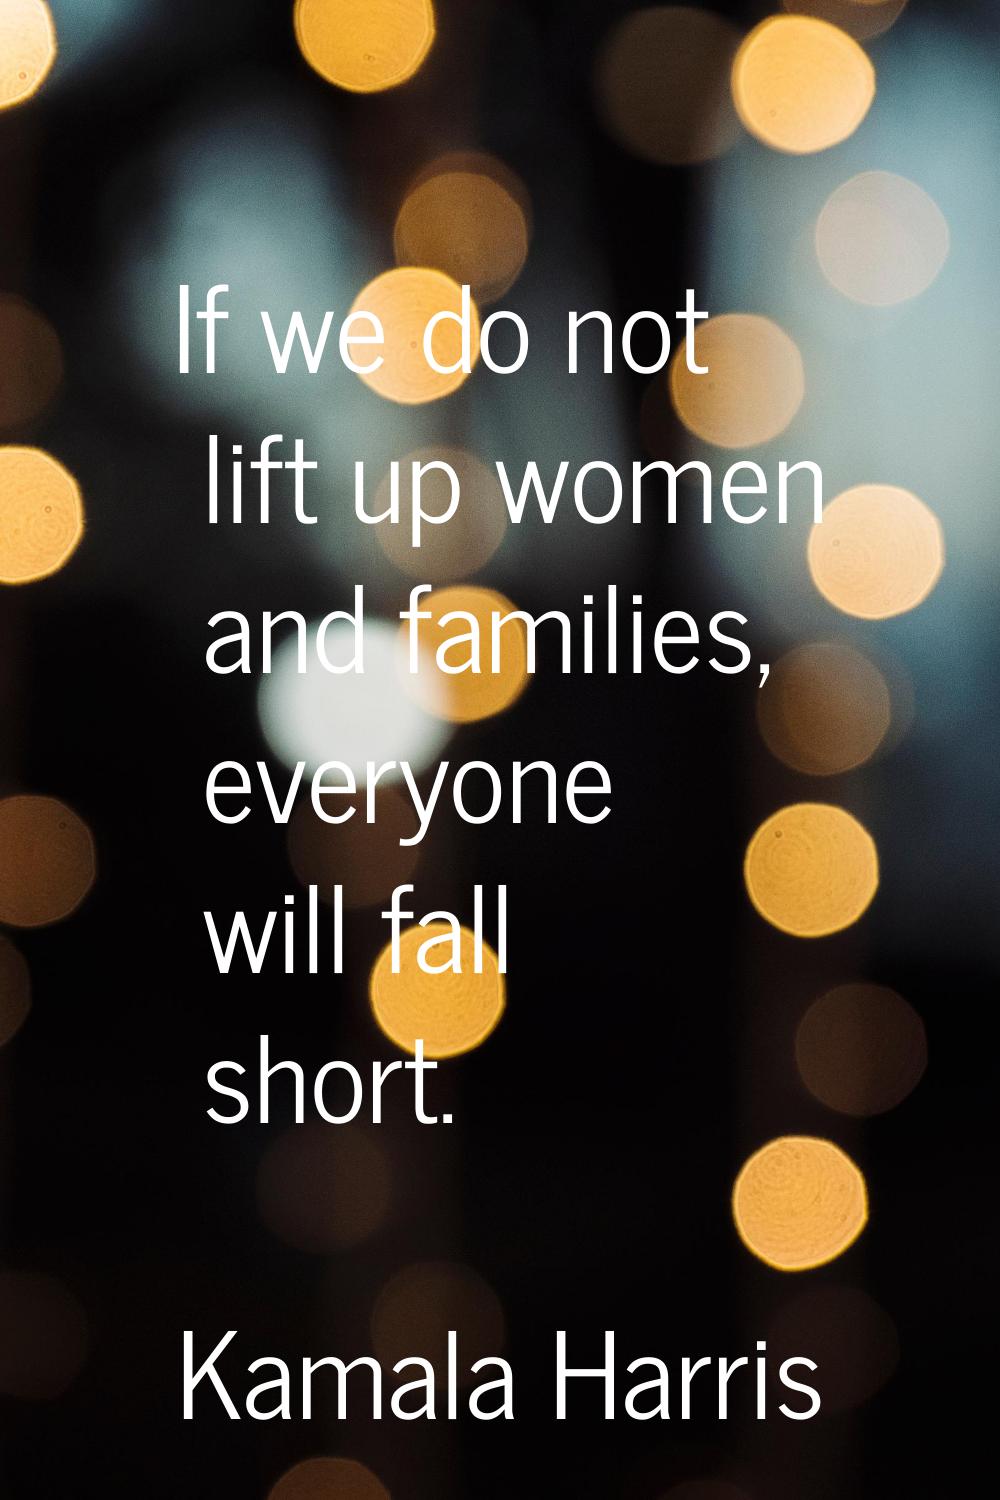 If we do not lift up women and families, everyone will fall short.